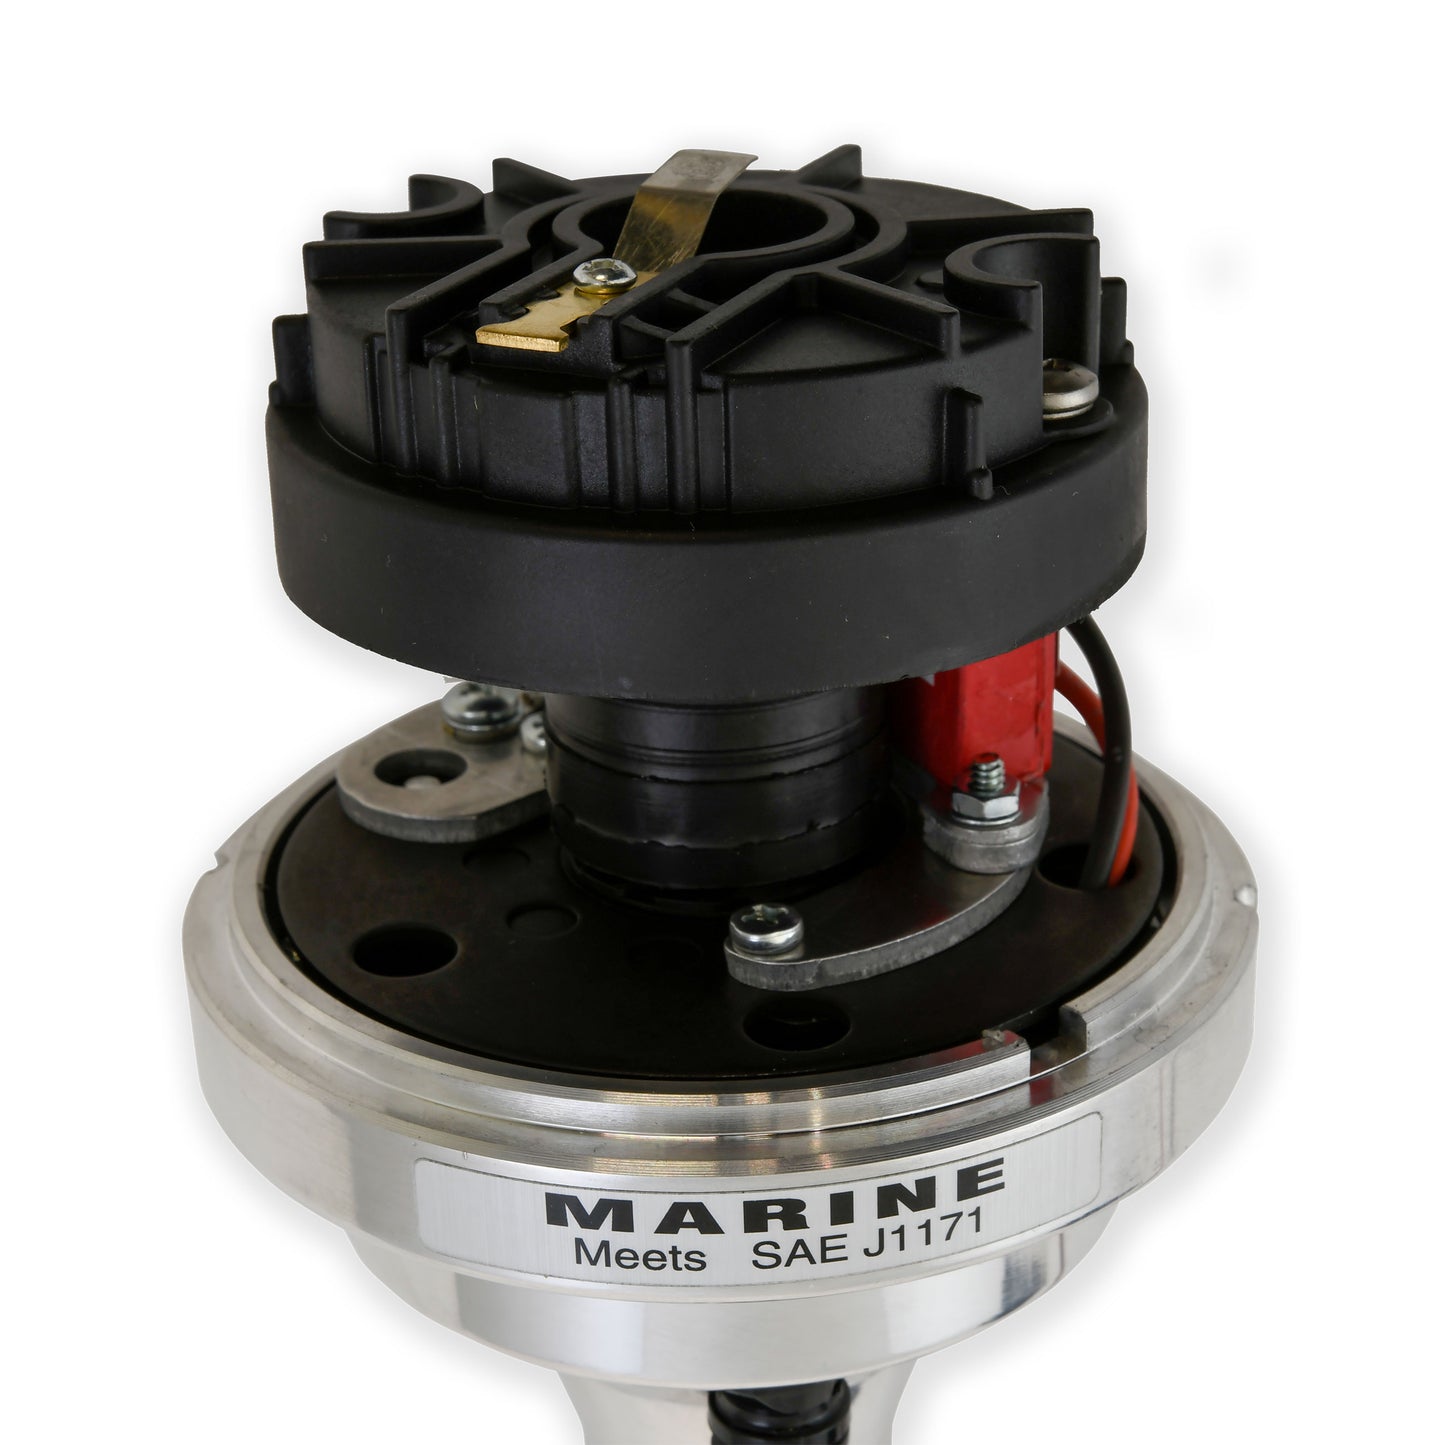 PerTronix D231800 Flame-Thrower Electronic Distributor Billet Marine Ford 351W Plug and Play with Ignitor II Black Cap